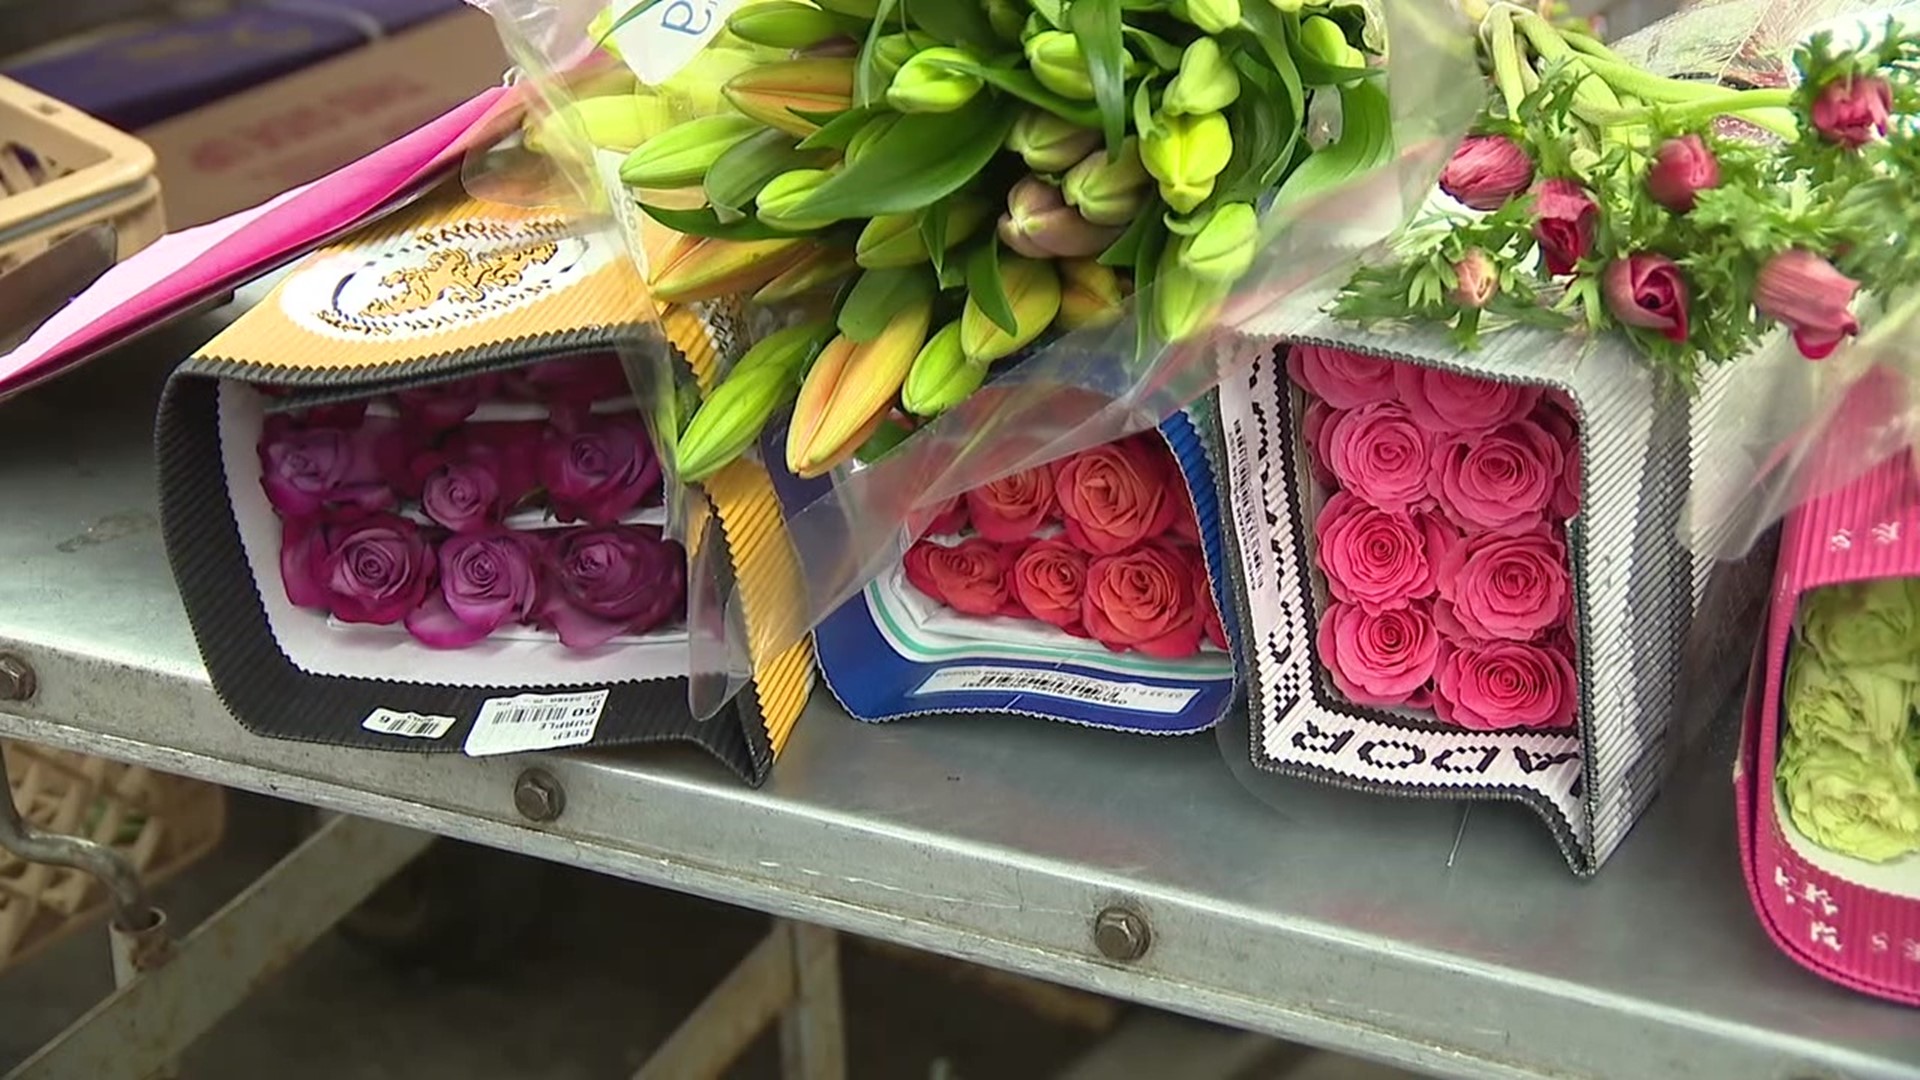 It's crunch time for Dillon Floral in Bloomsburg.